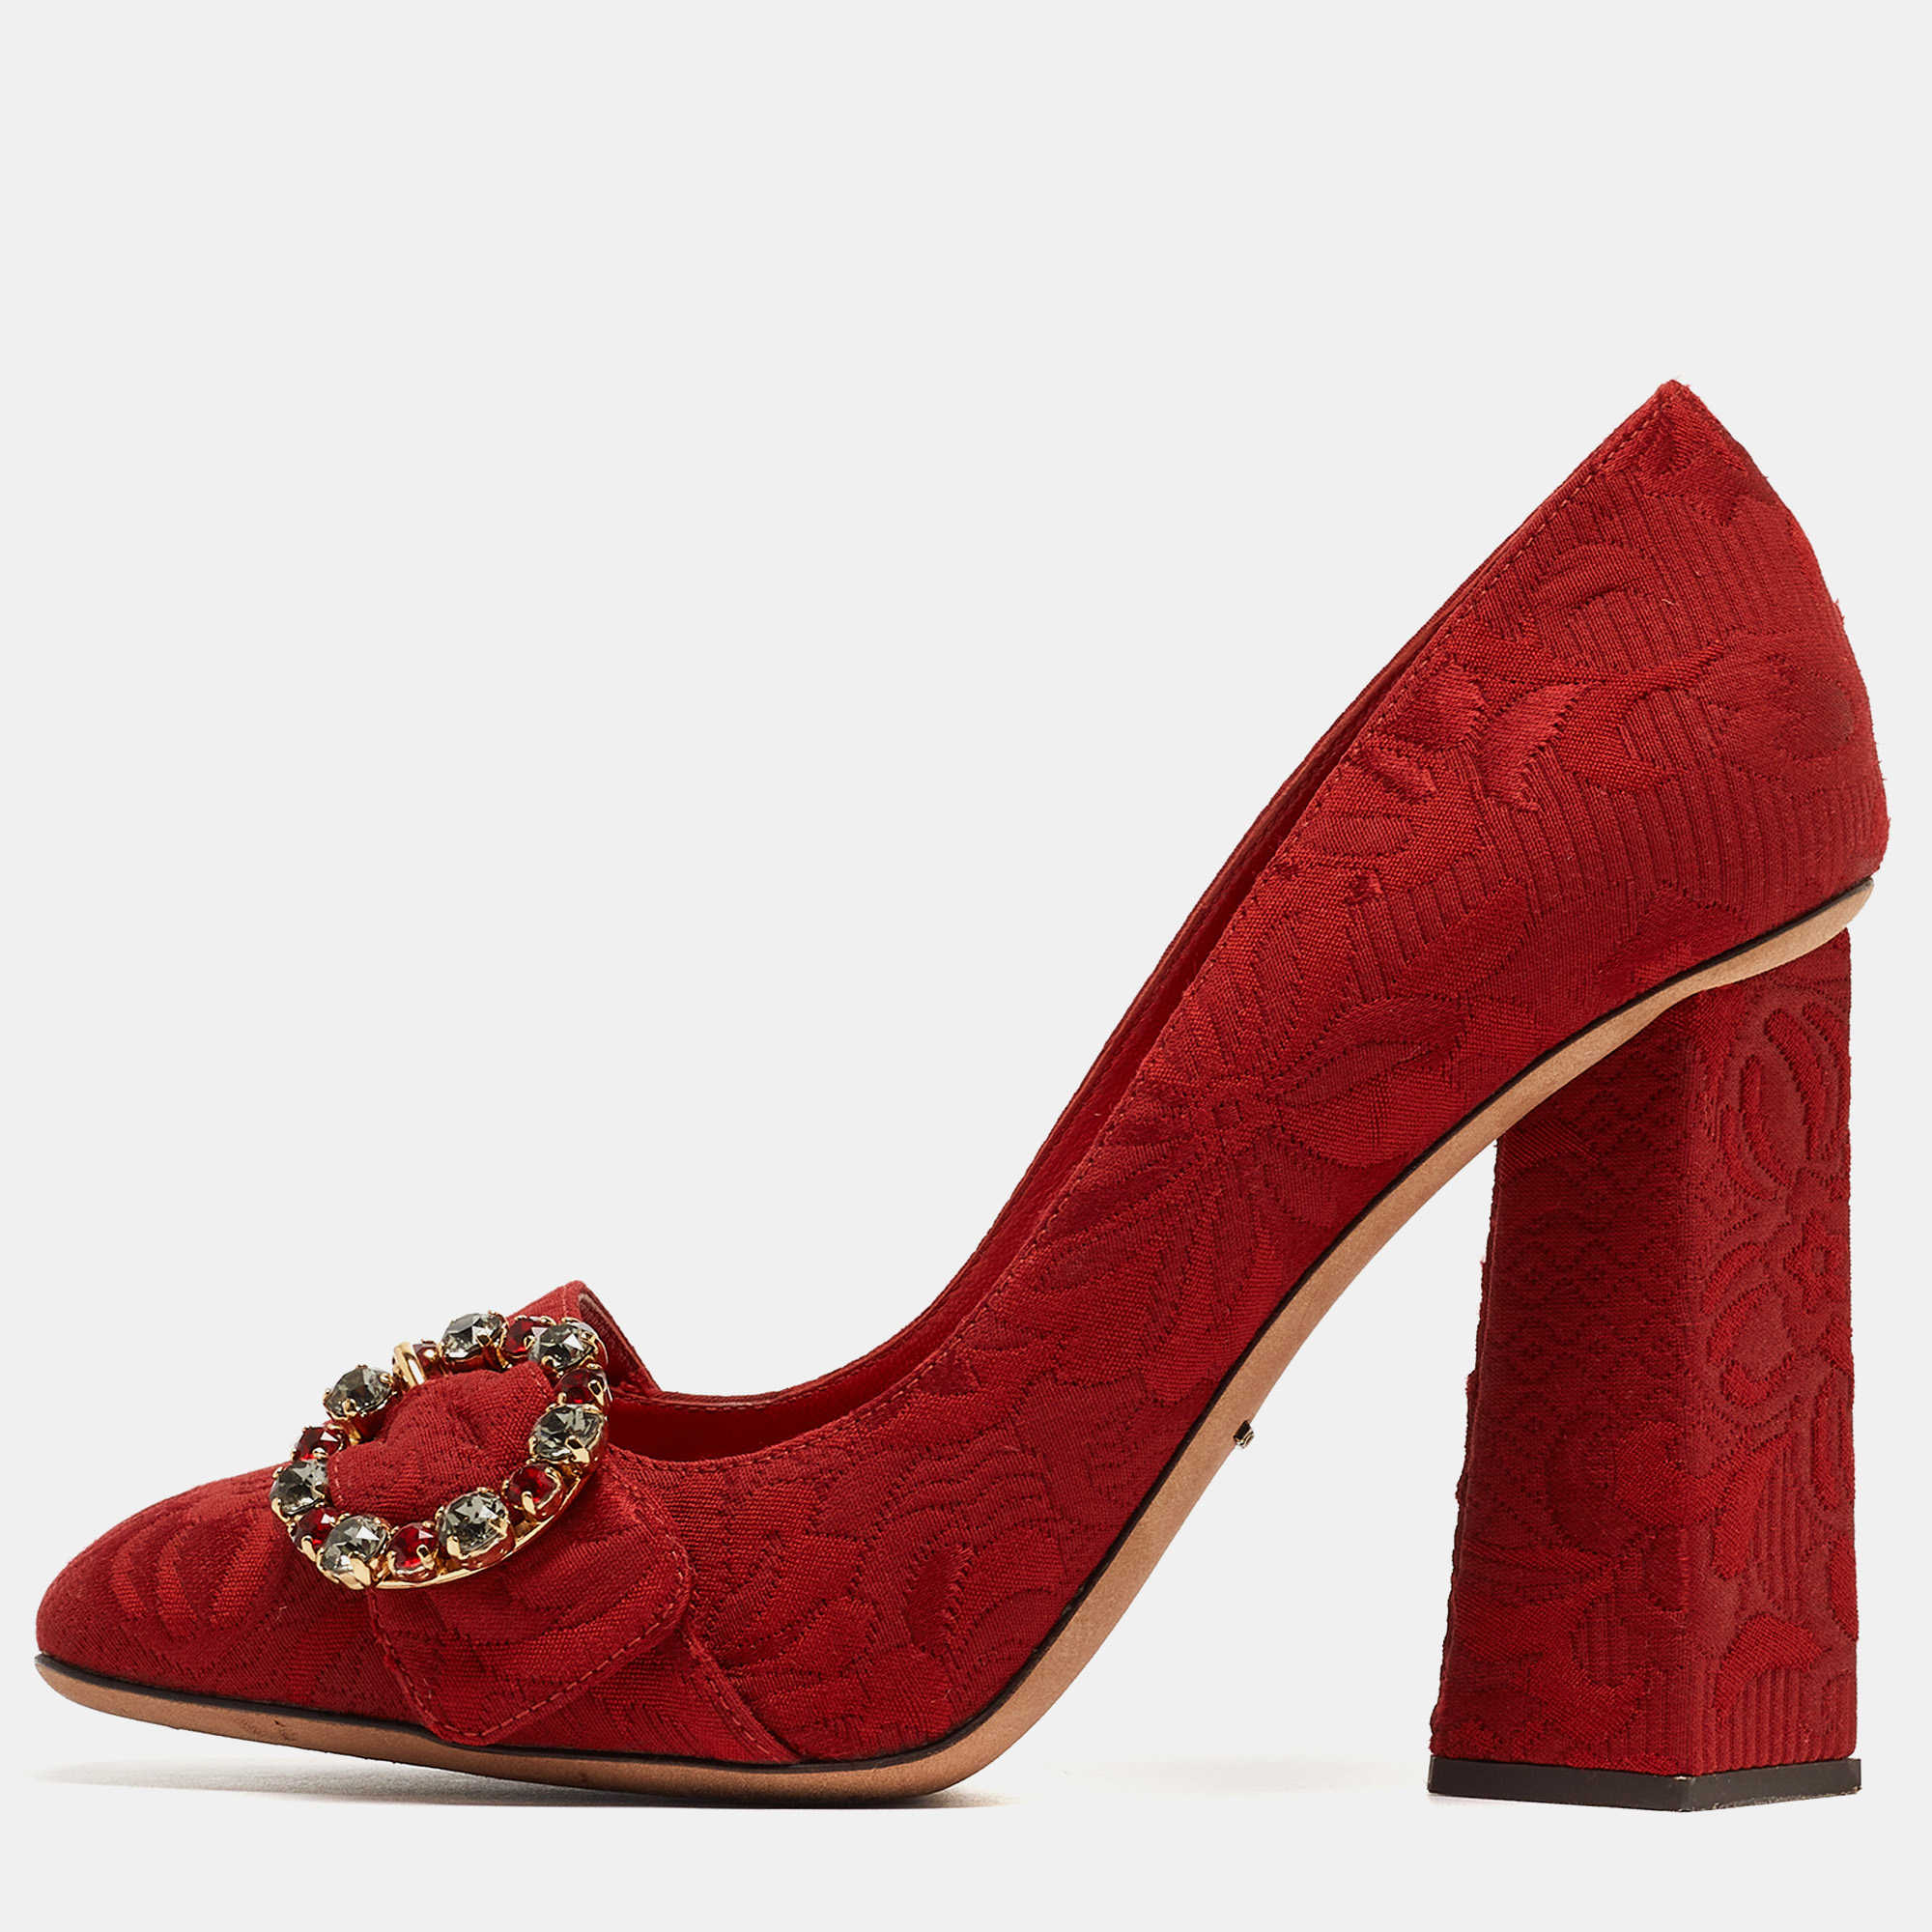 Pre-owned Dolce & Gabbana Red Brocade Fabric Block Heel Pumps Size 40